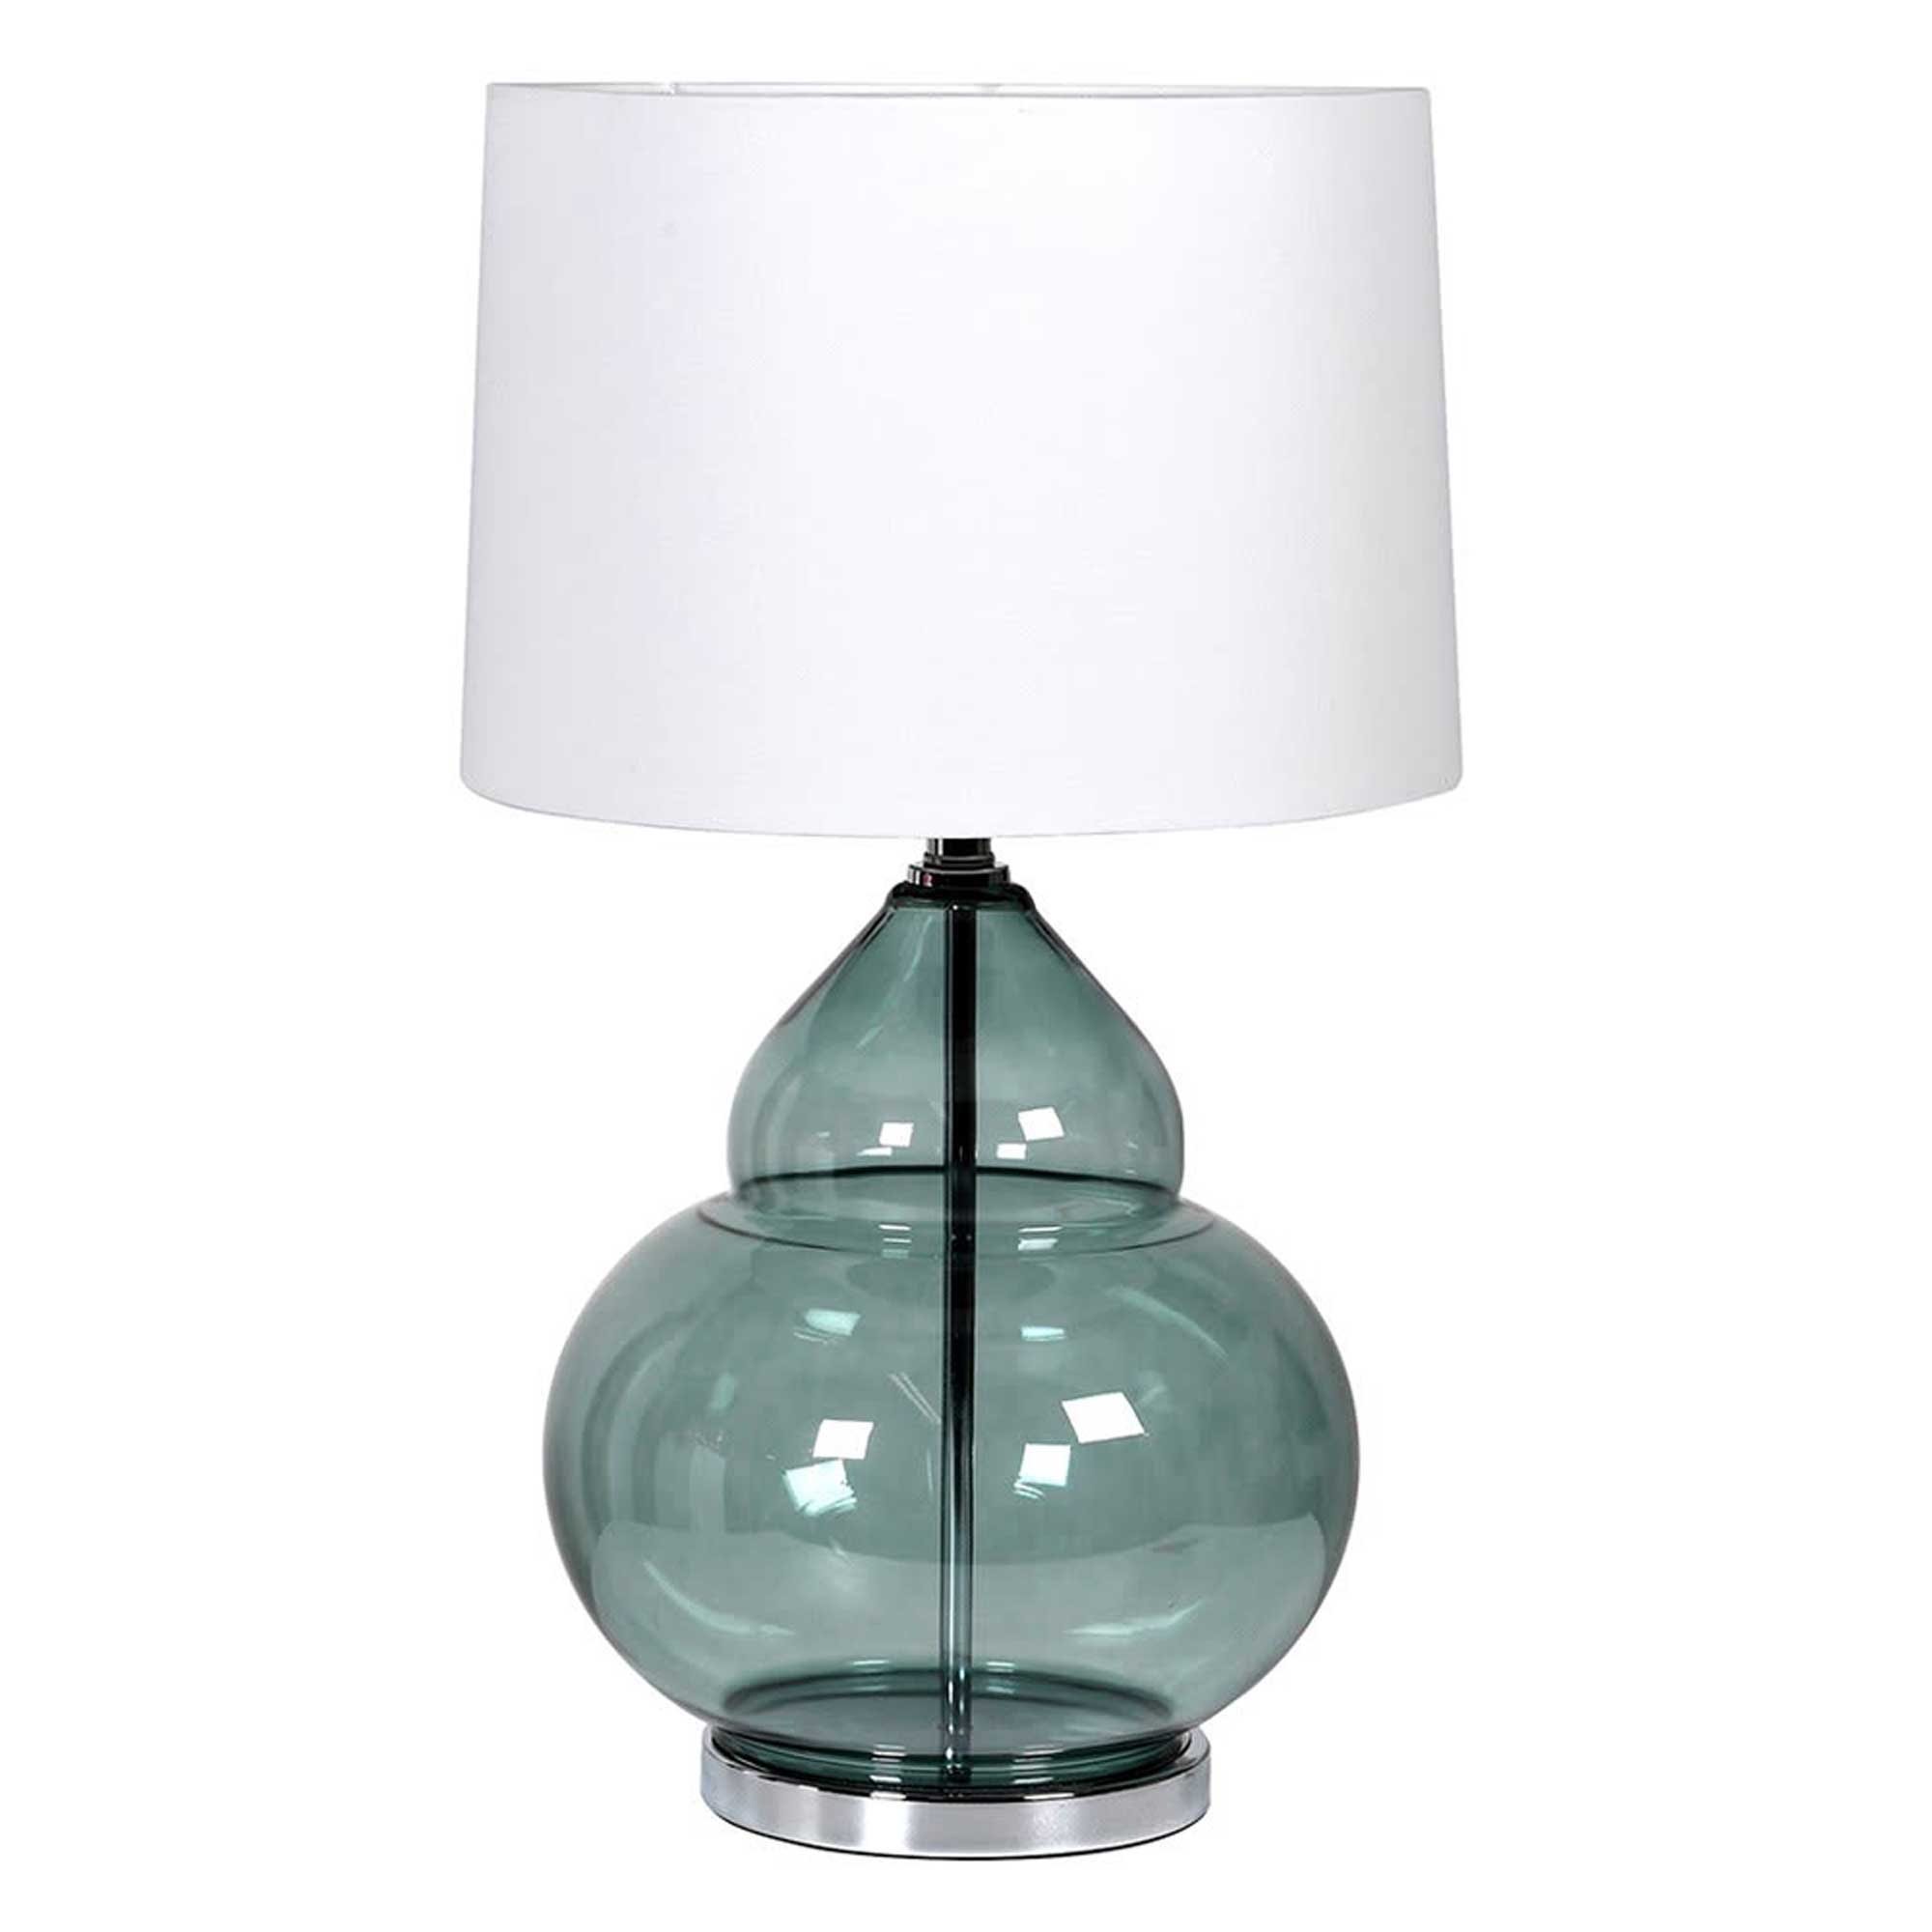 Green Bubble Glass Table Lamp | Barker & Stonehouse